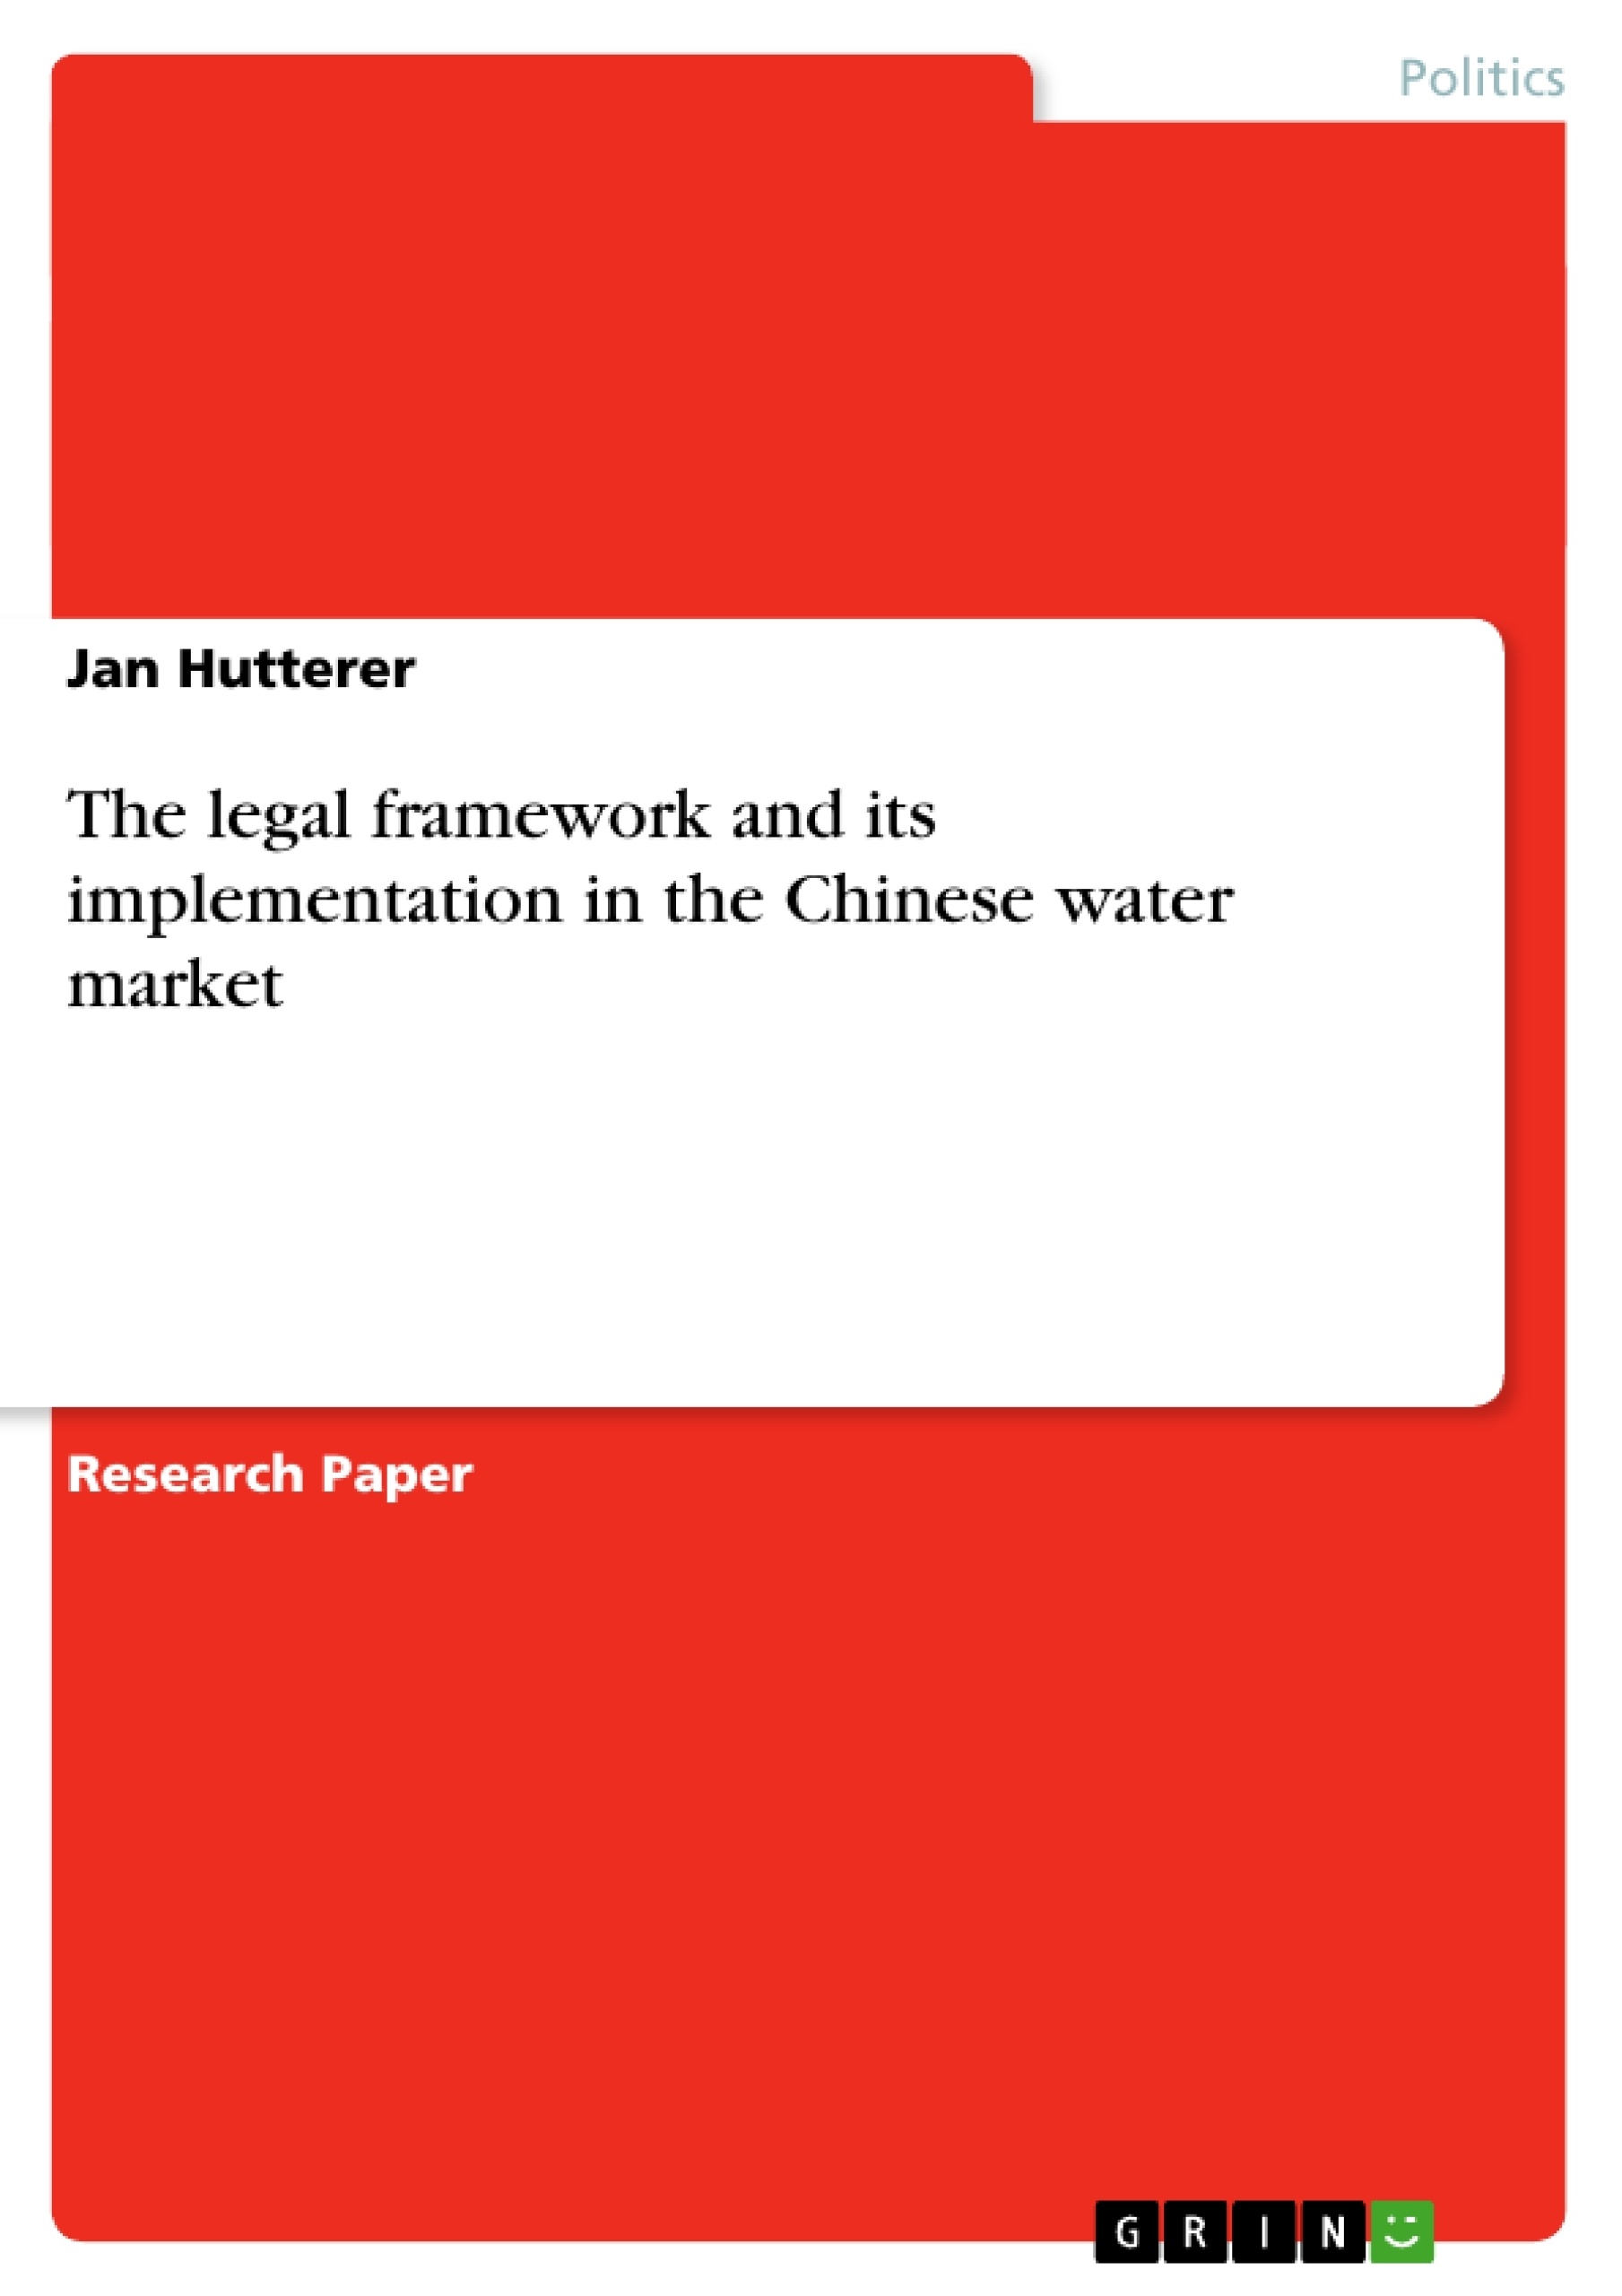 Title: The legal framework and its implementation in the Chinese water market